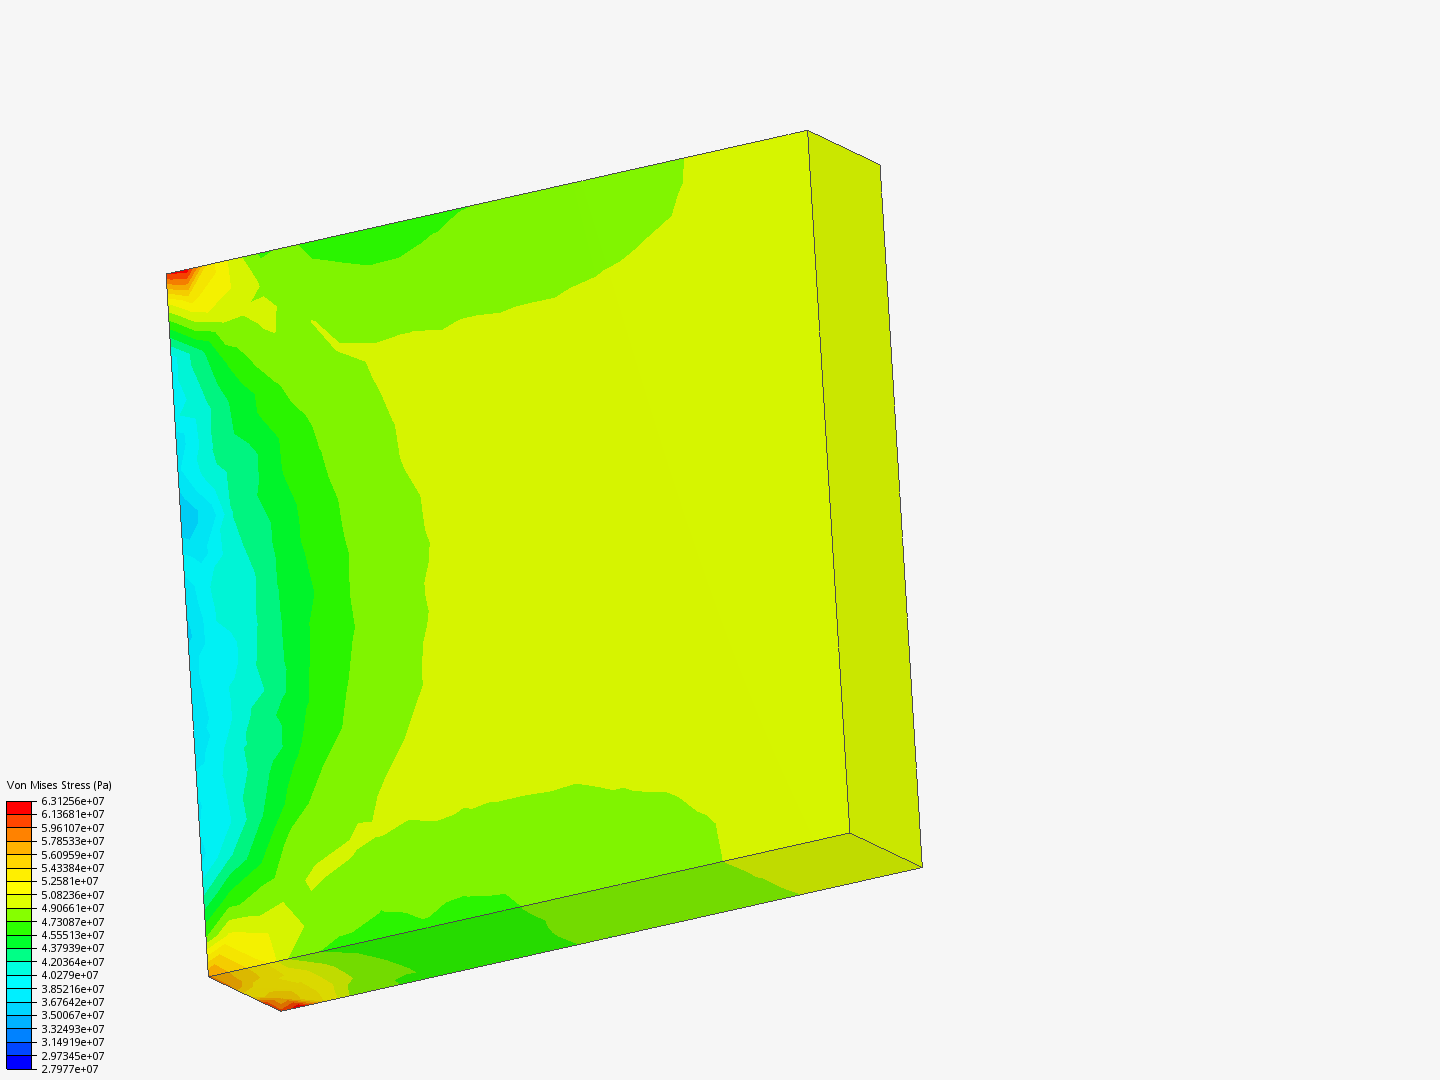 Tutorial 3: Differential casing thermal analysis - Copy - Copy image